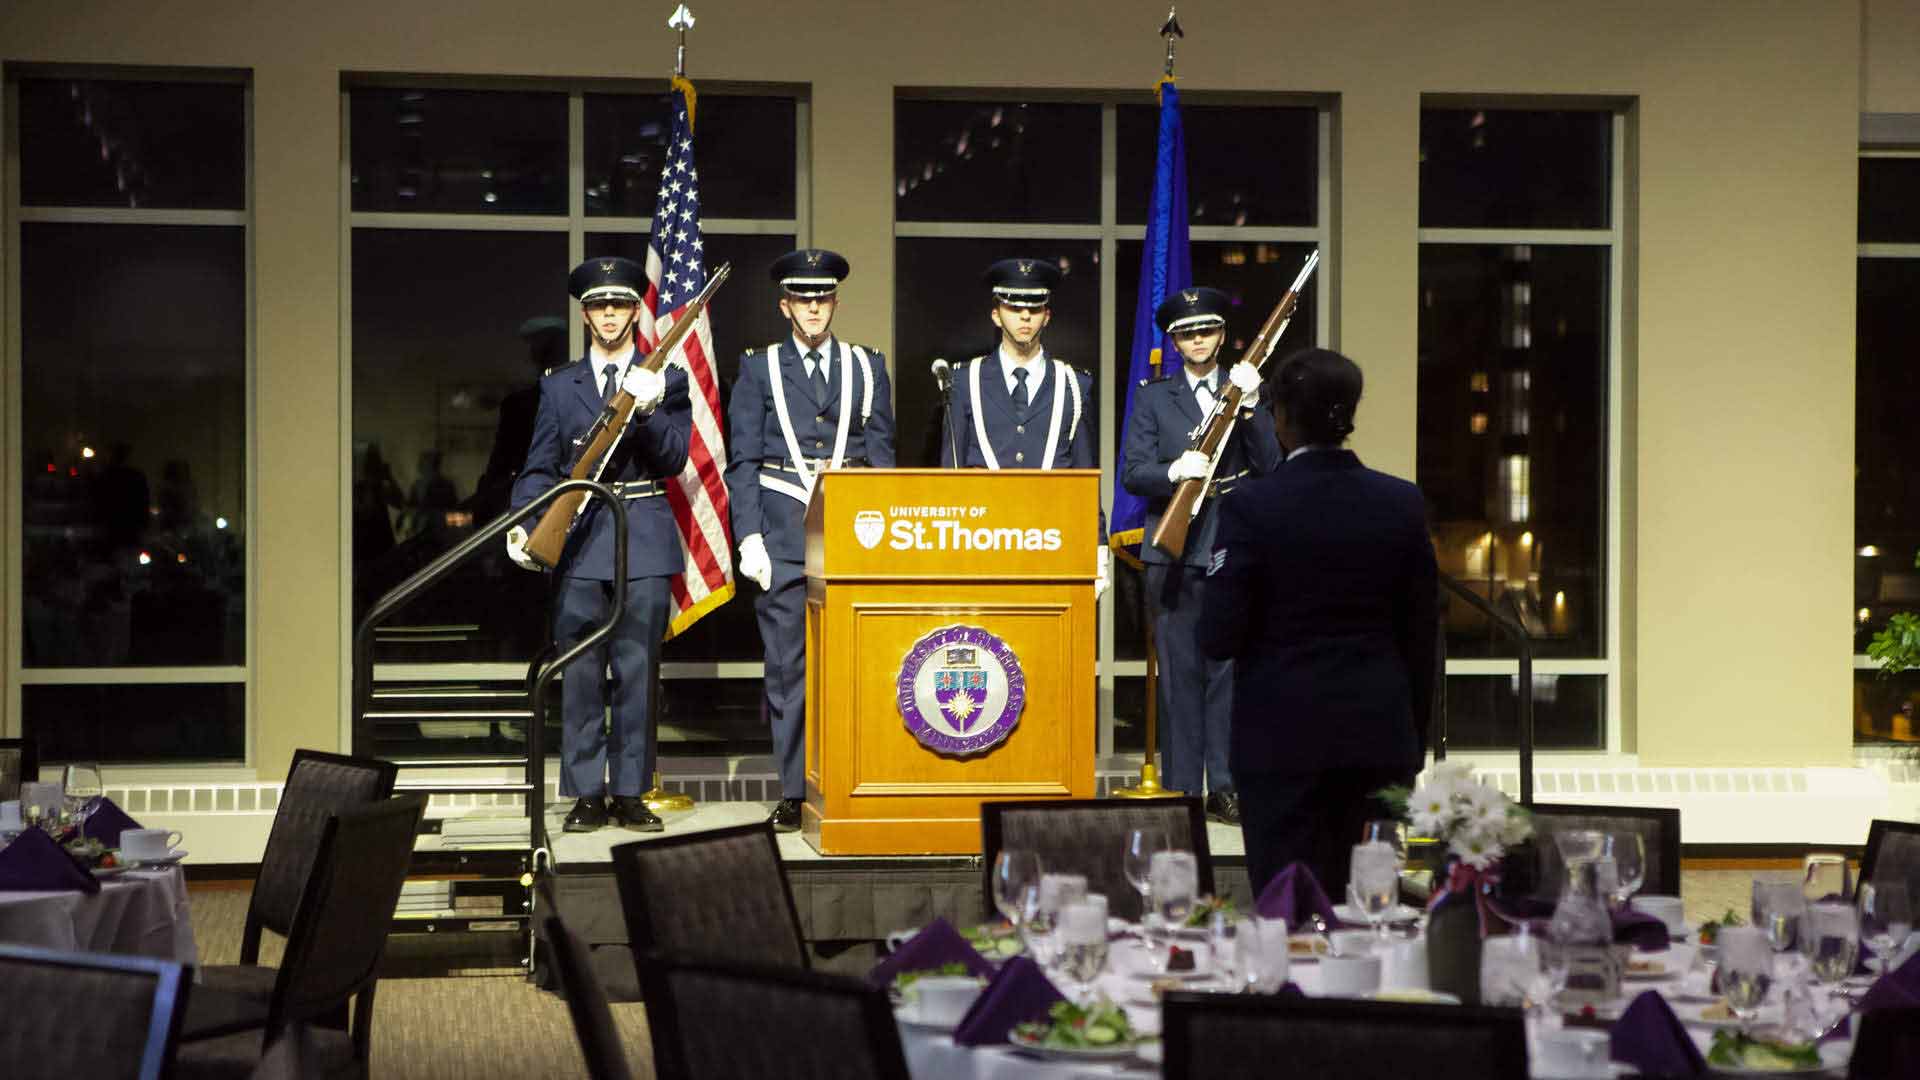 Veterans stand behind a podium at the veterans ball